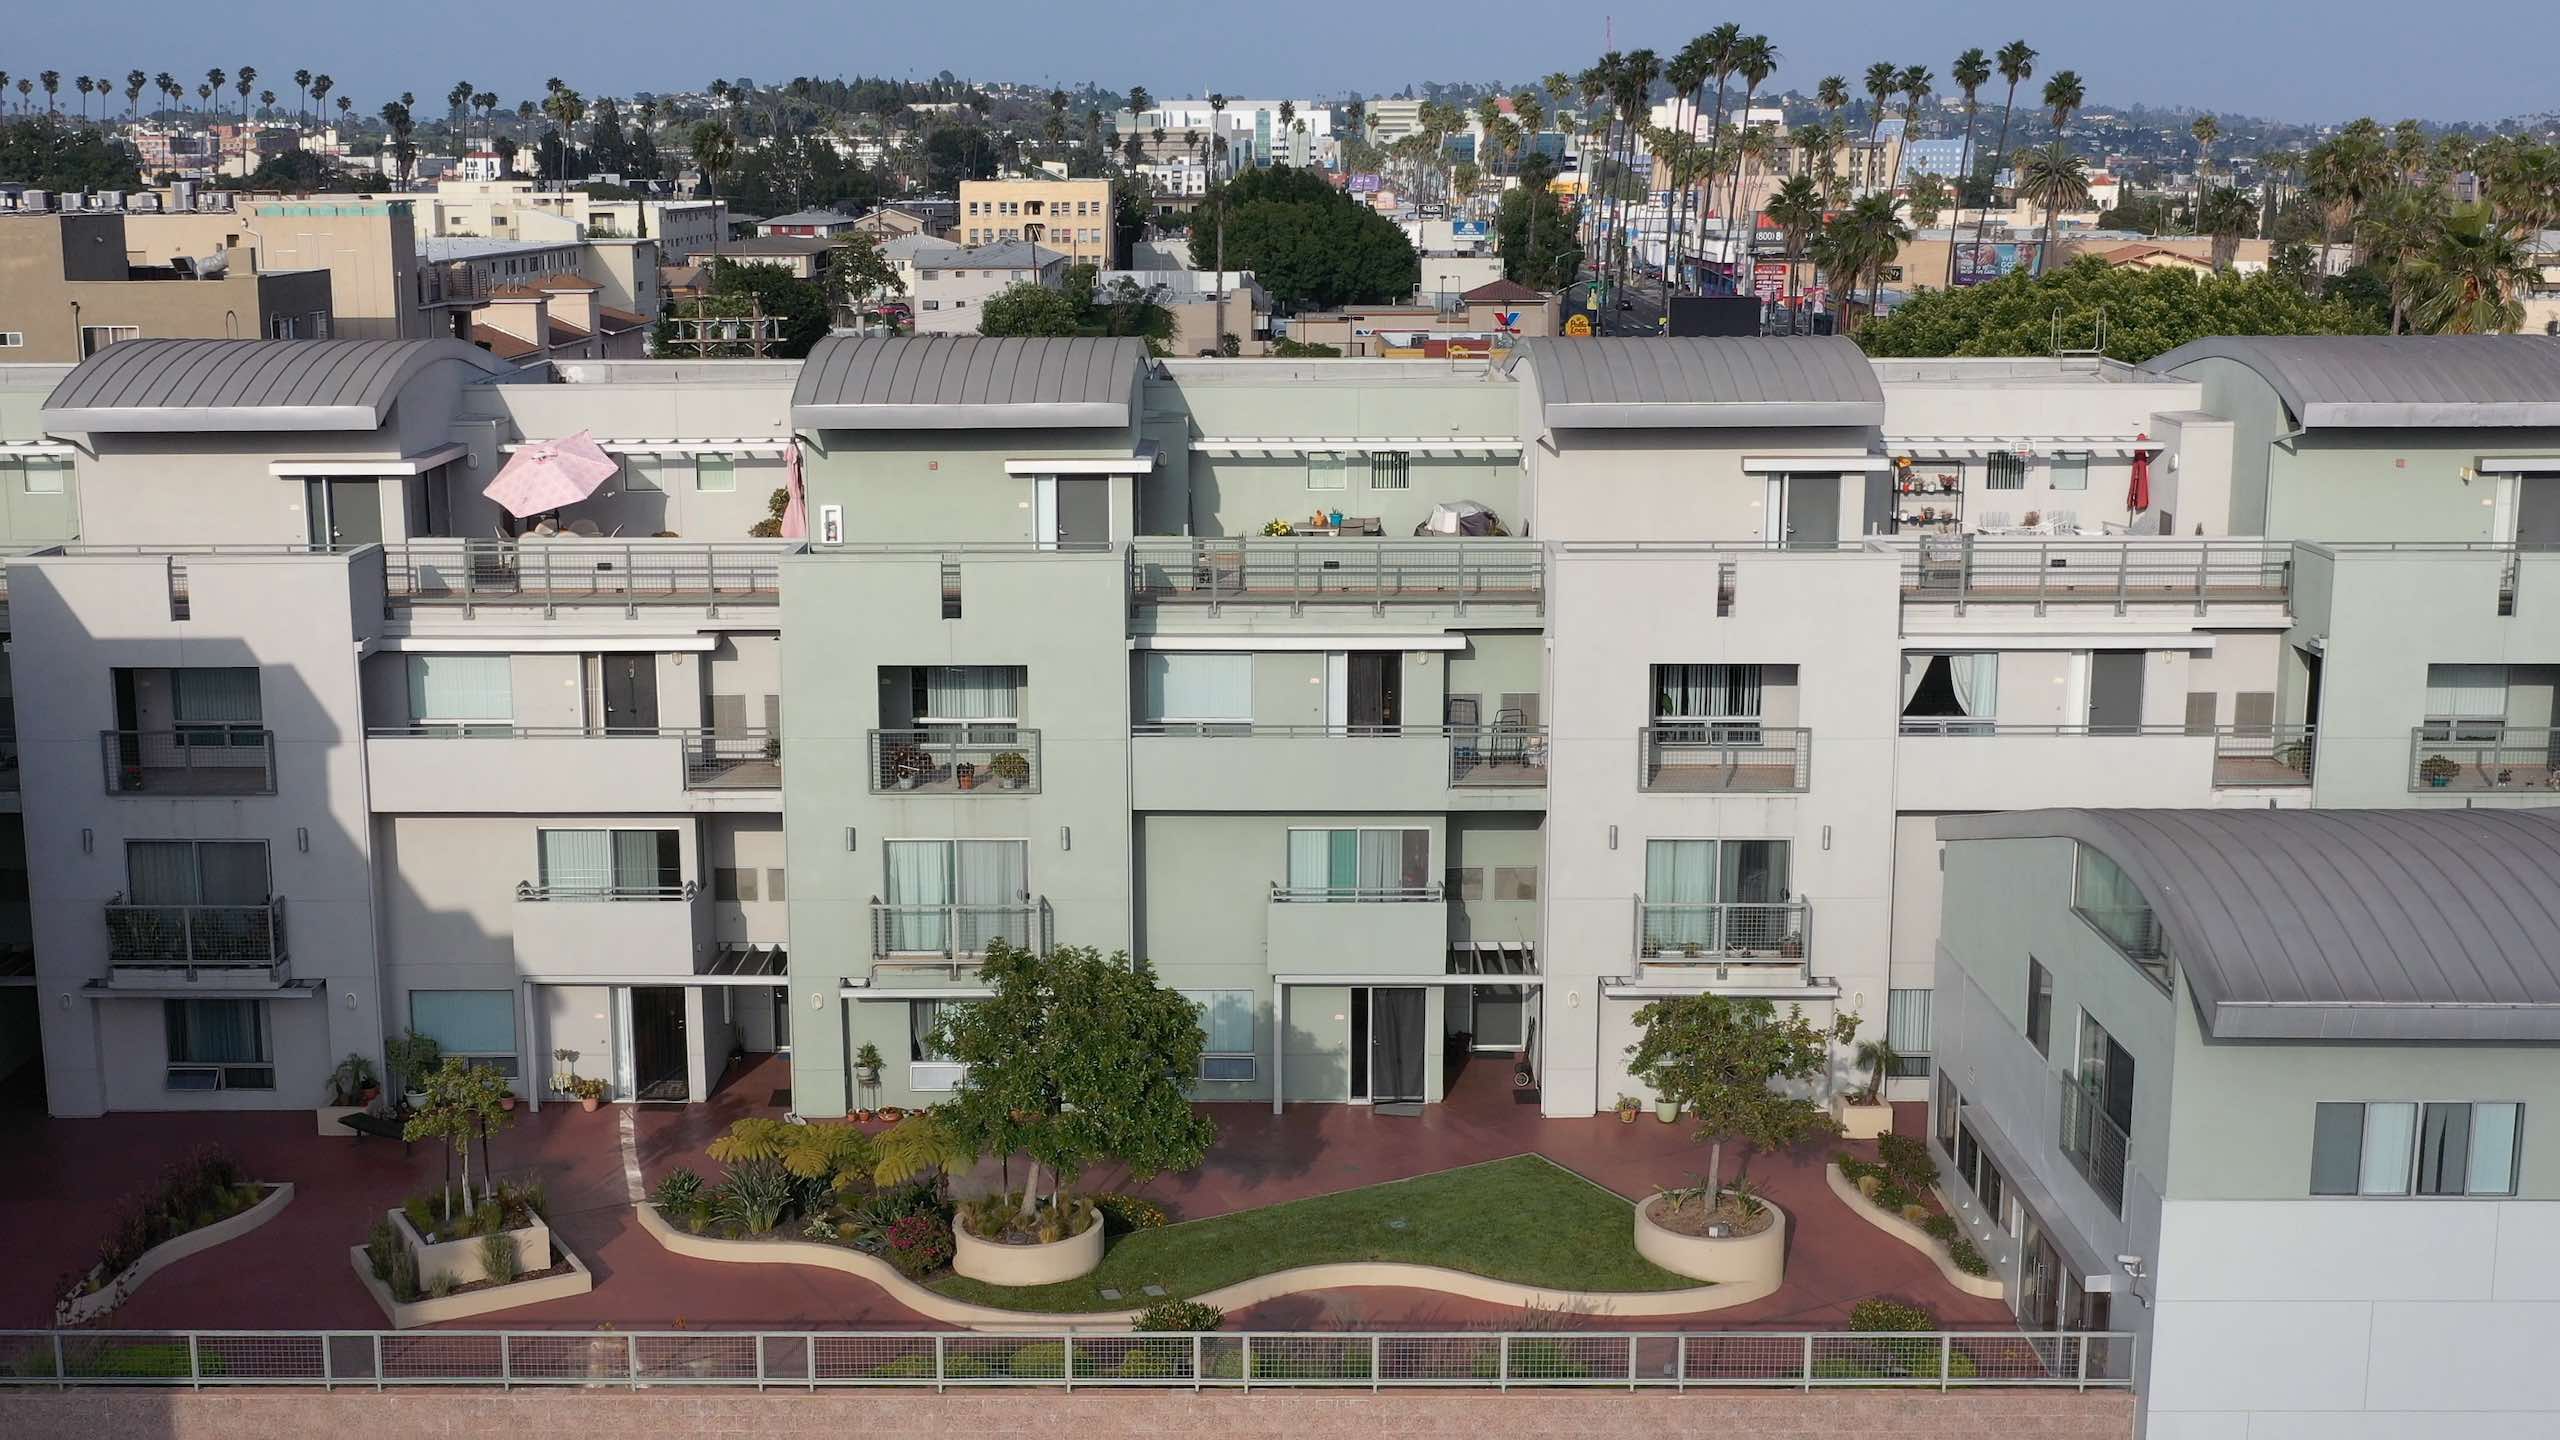 Hollywood Community Housing company profile with aerial view of housing in a city